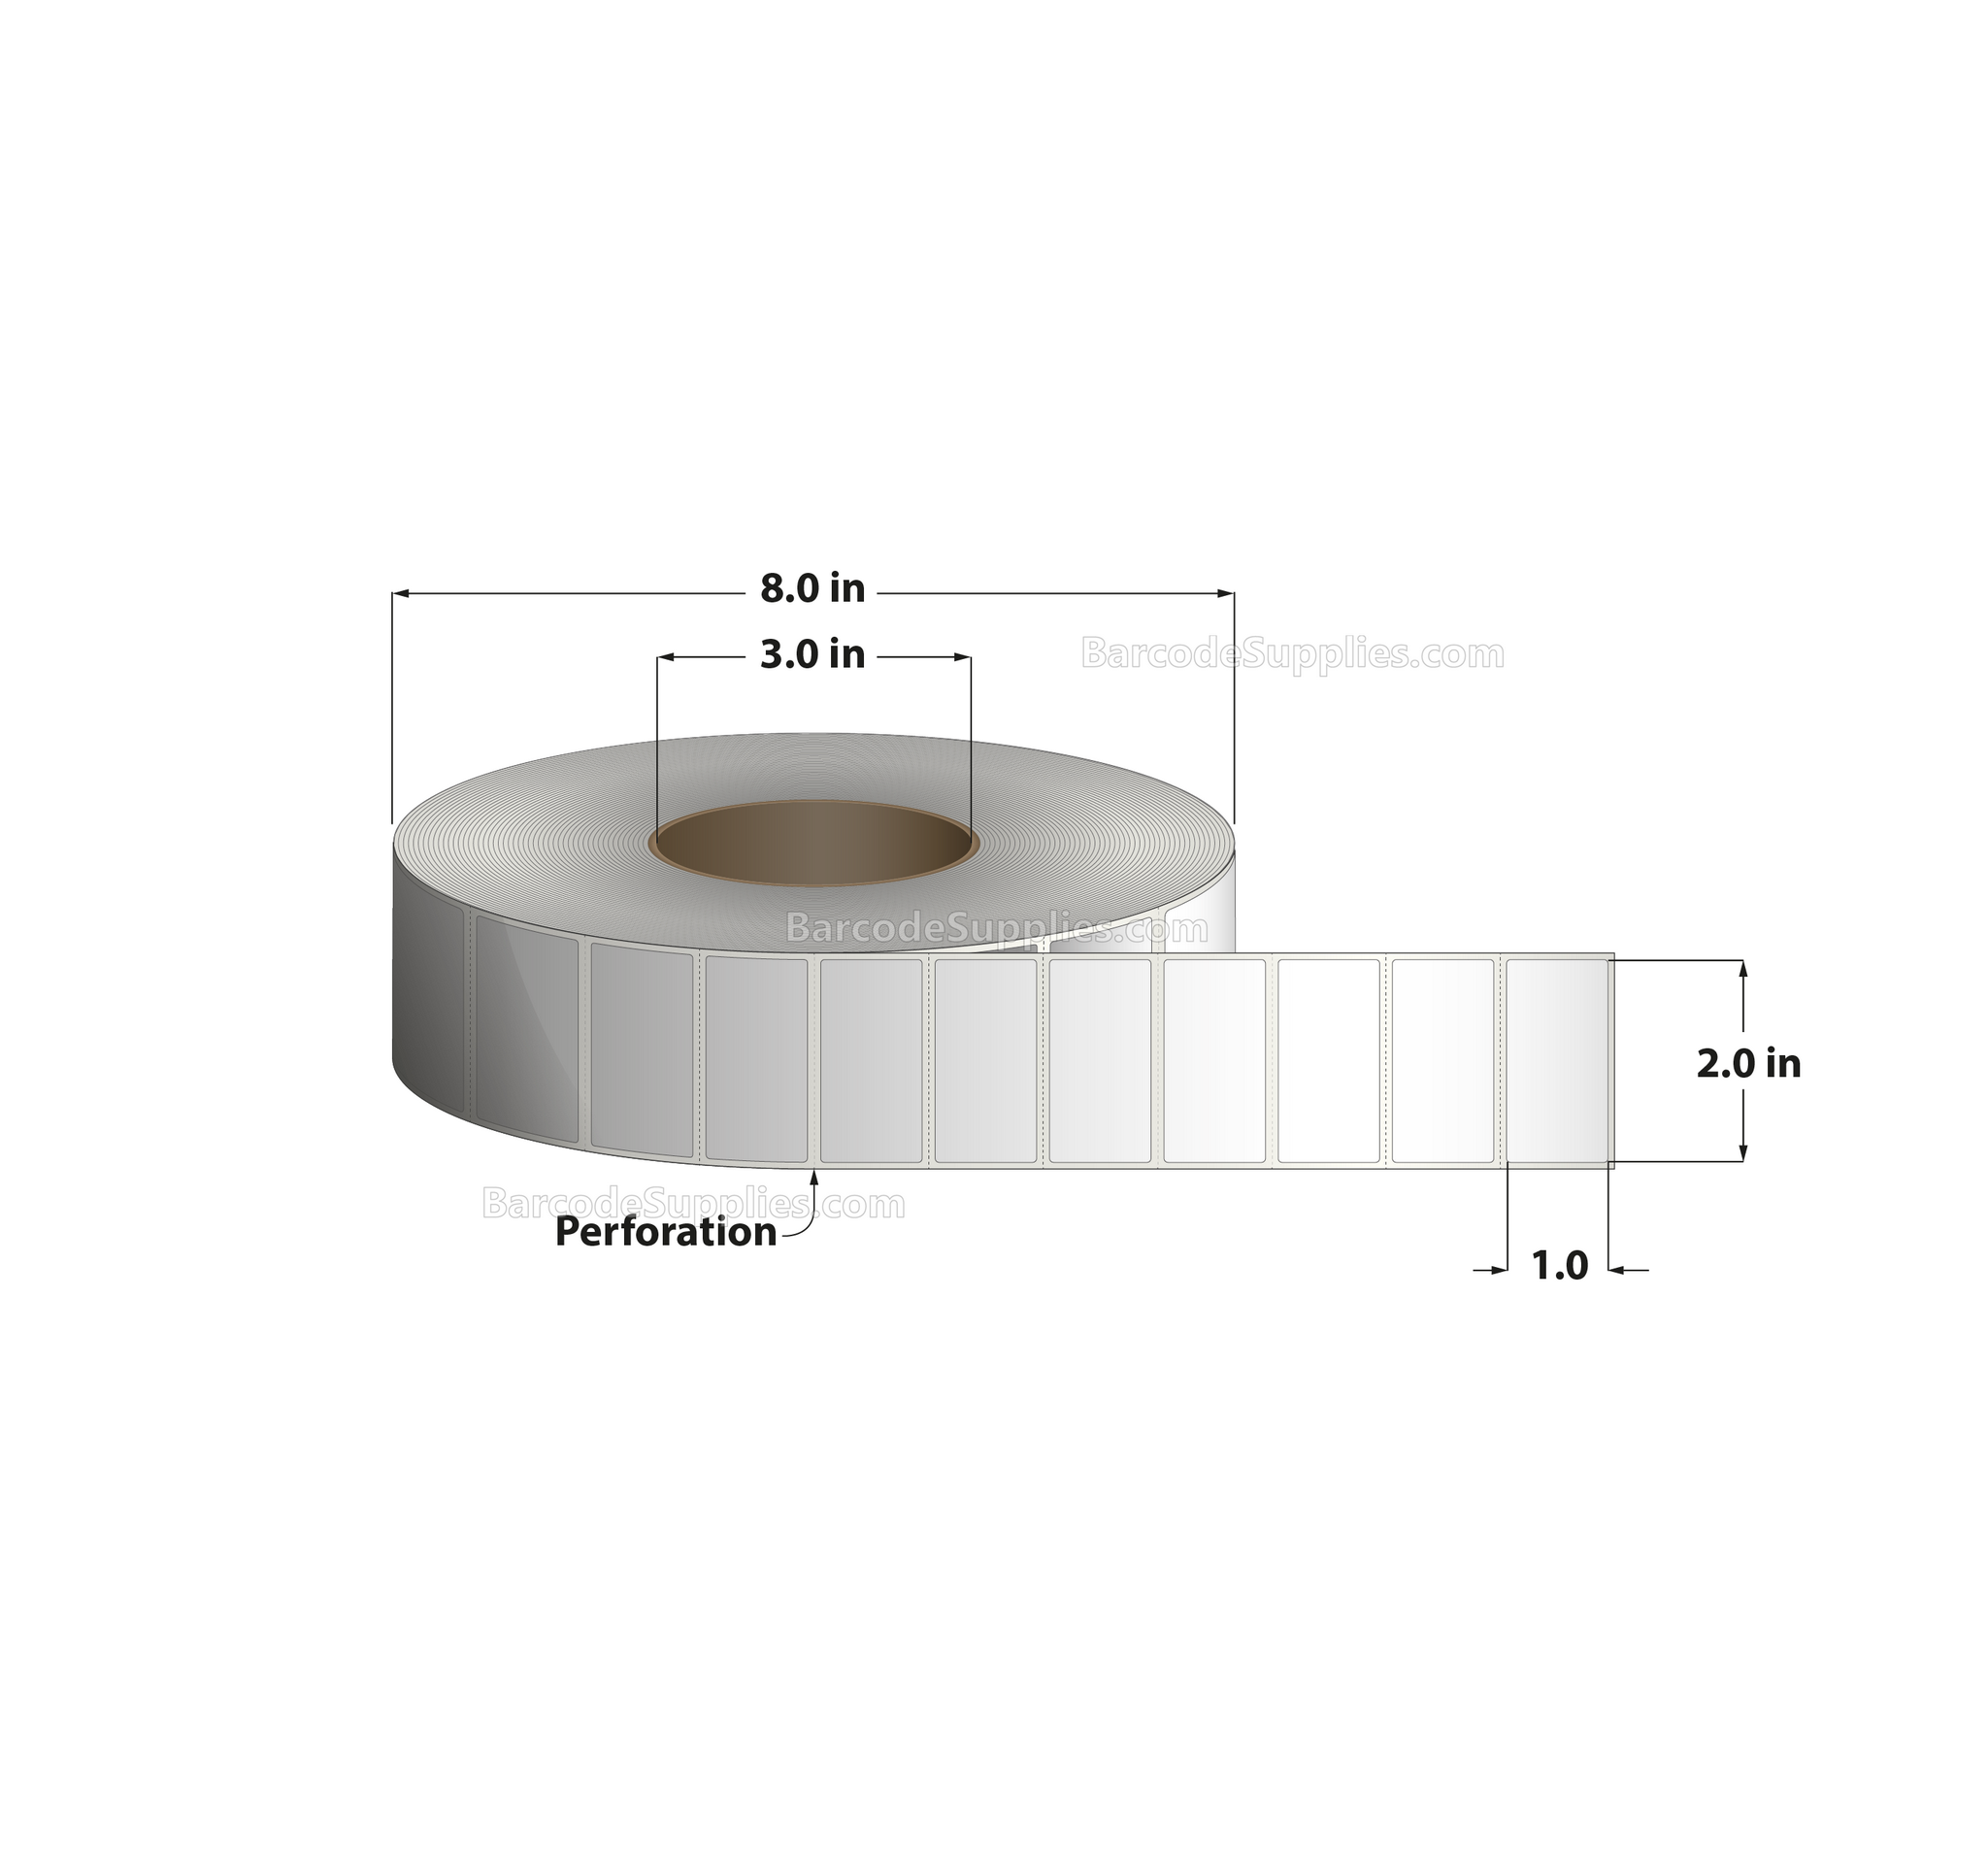 2 x 1 Direct Thermal White Labels With Acrylic Adhesive - Perforated - 5500 Labels Per Roll - Carton Of 8 Rolls - 44000 Labels Total - MPN: RD-2-1-5500-3 - BarcodeSource, Inc.